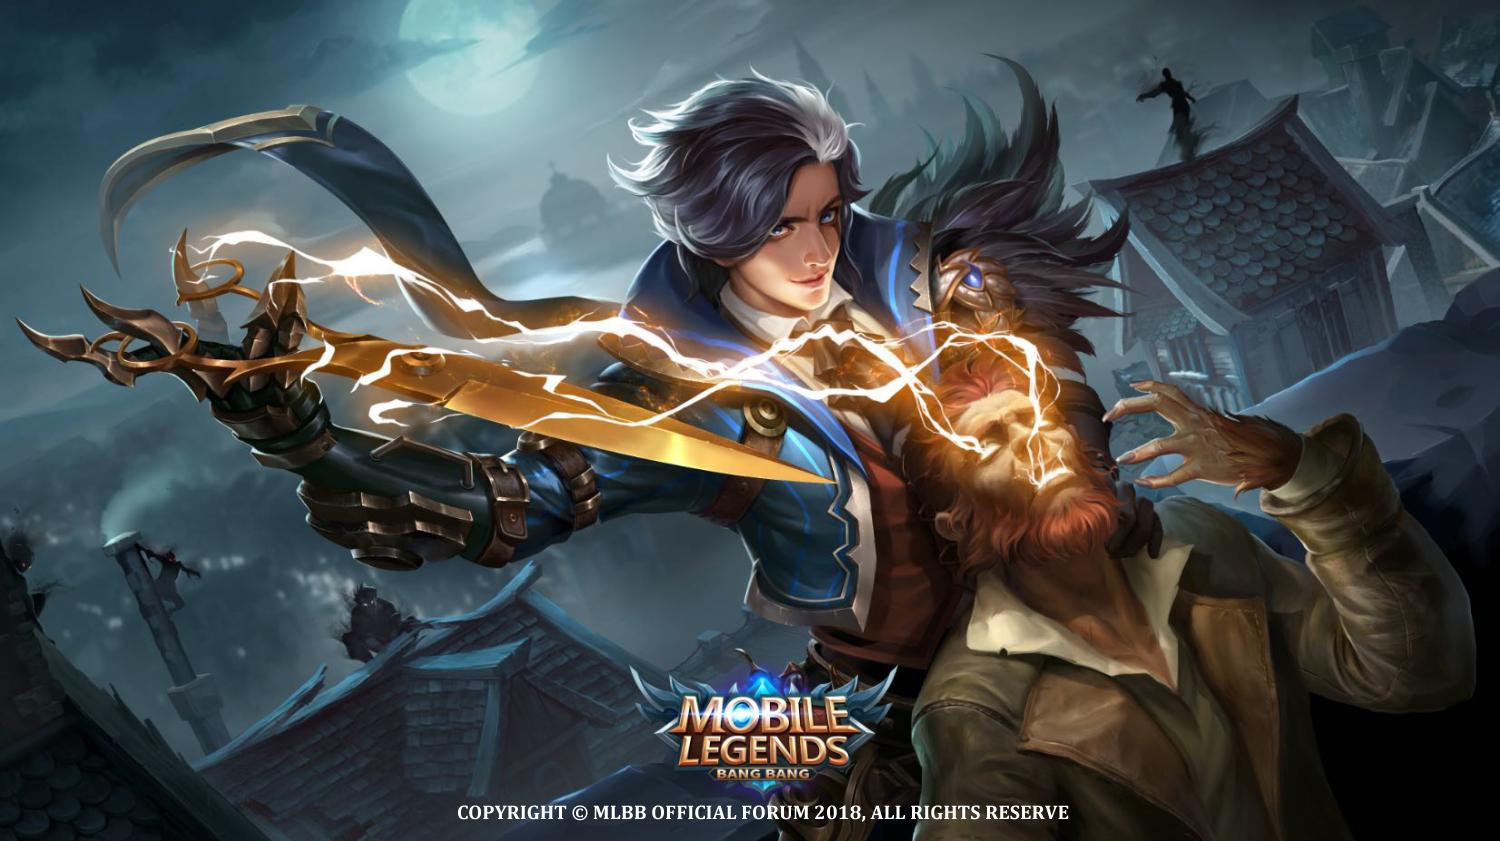 Gusion Mobile Legends 5v5 Moba Hairstylist Wallpaper HD